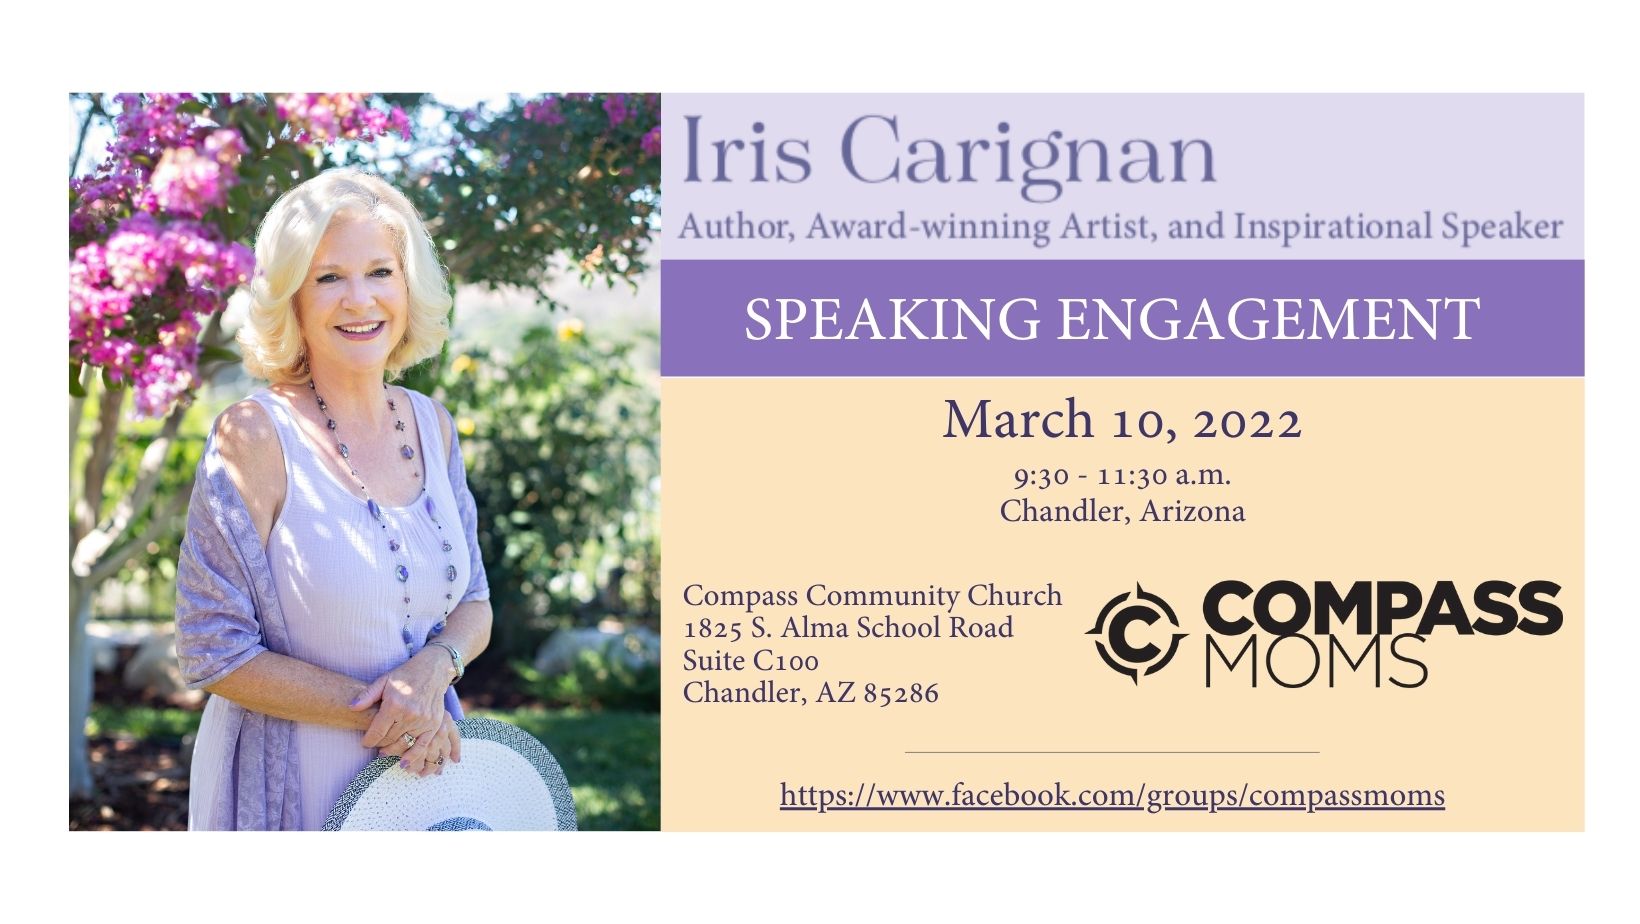 New Speaking Engagements